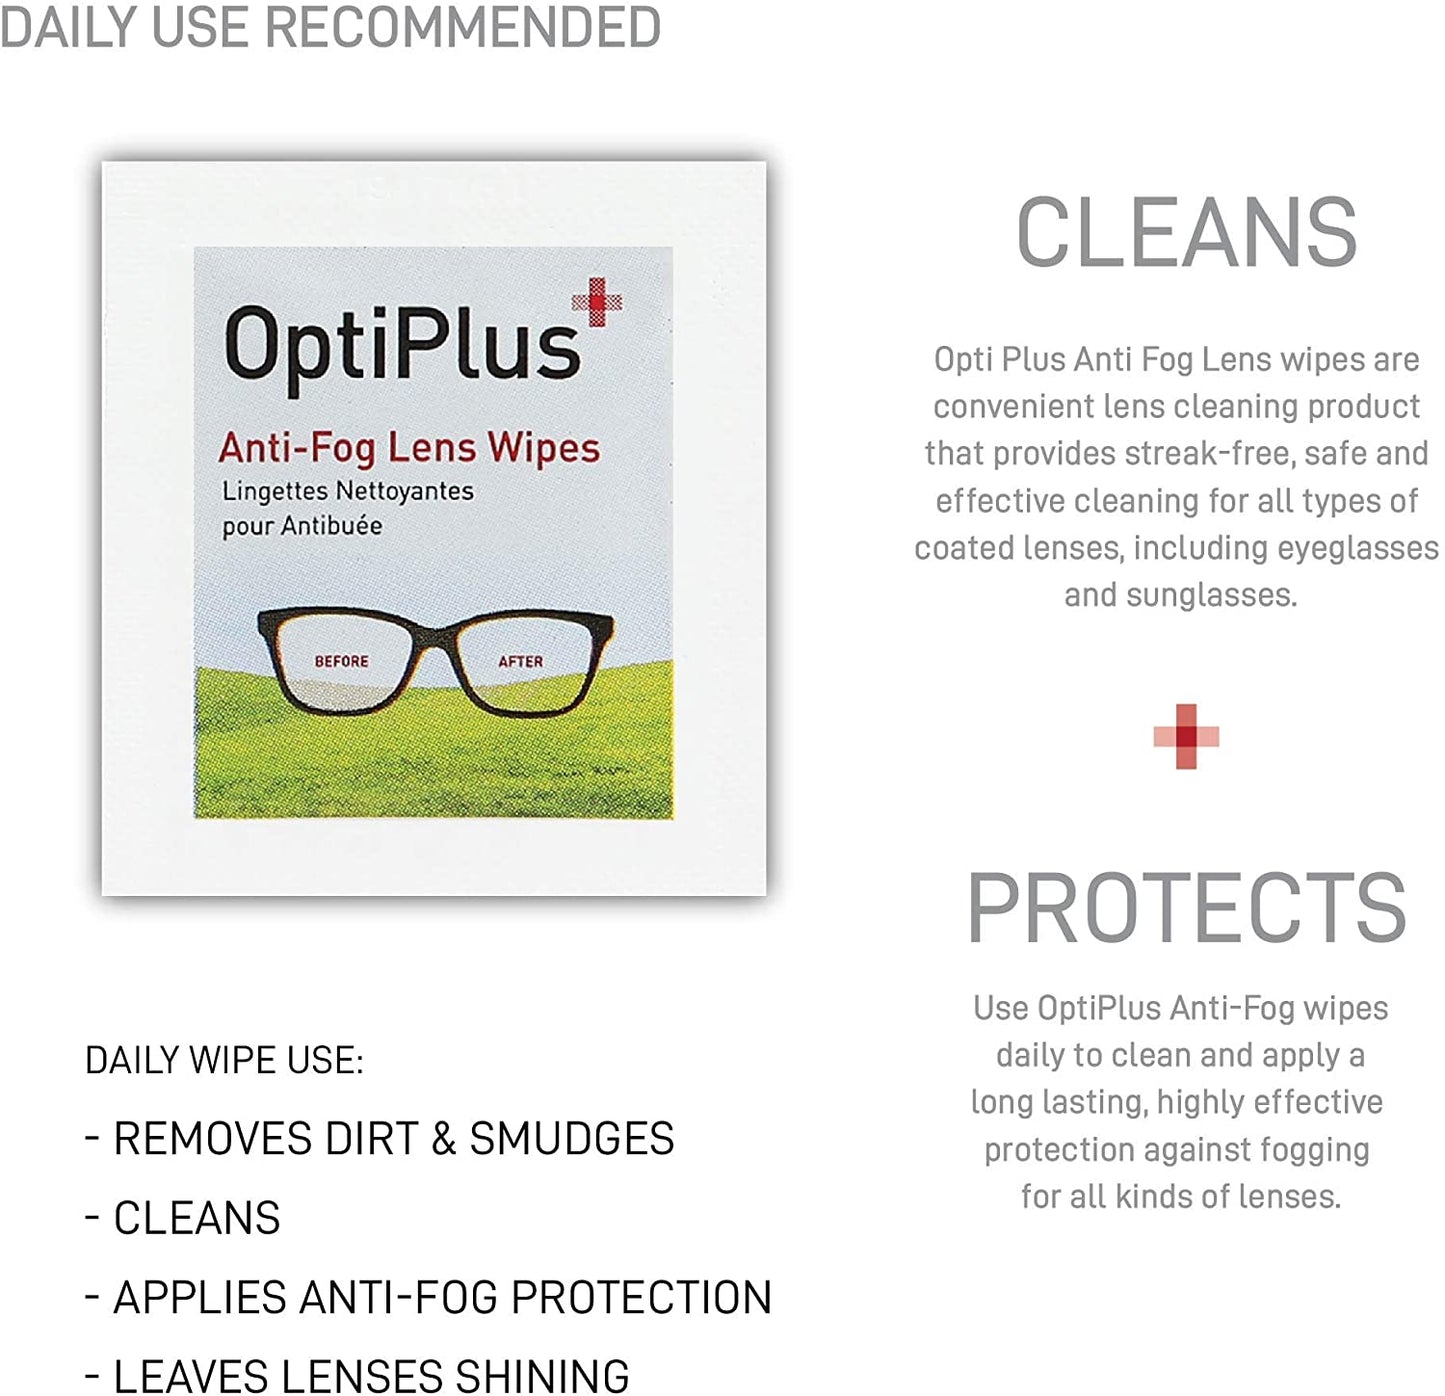 Opti Plus Anti-Fog Lens Wipes packaging indicating how it cleans and protects your glasses